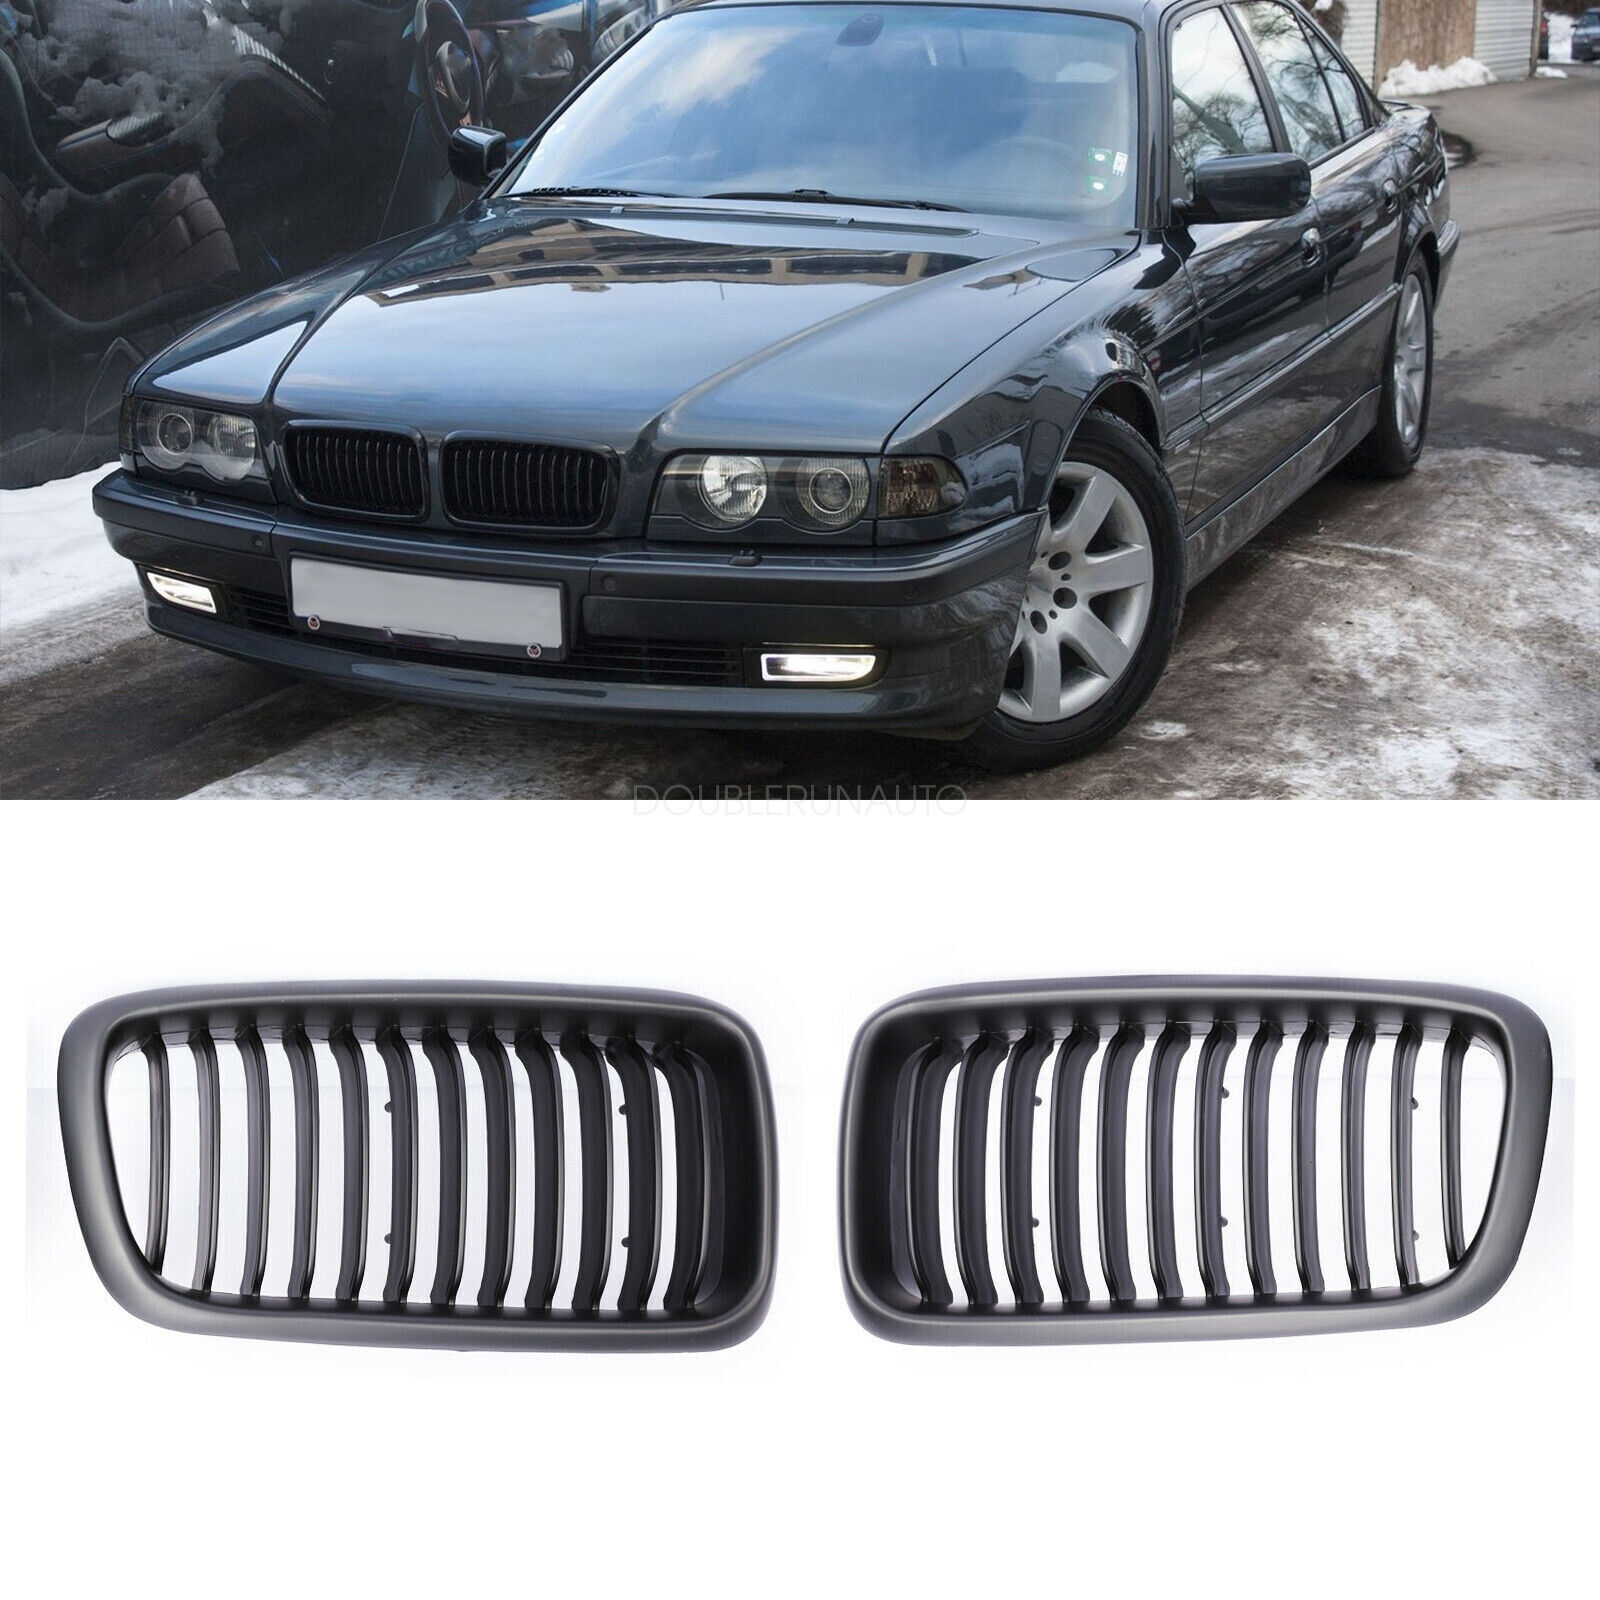 Front Kidney Grille For 1998-2001 BMW E38 7 Series Saloon 4D 740i 740iL 750iL